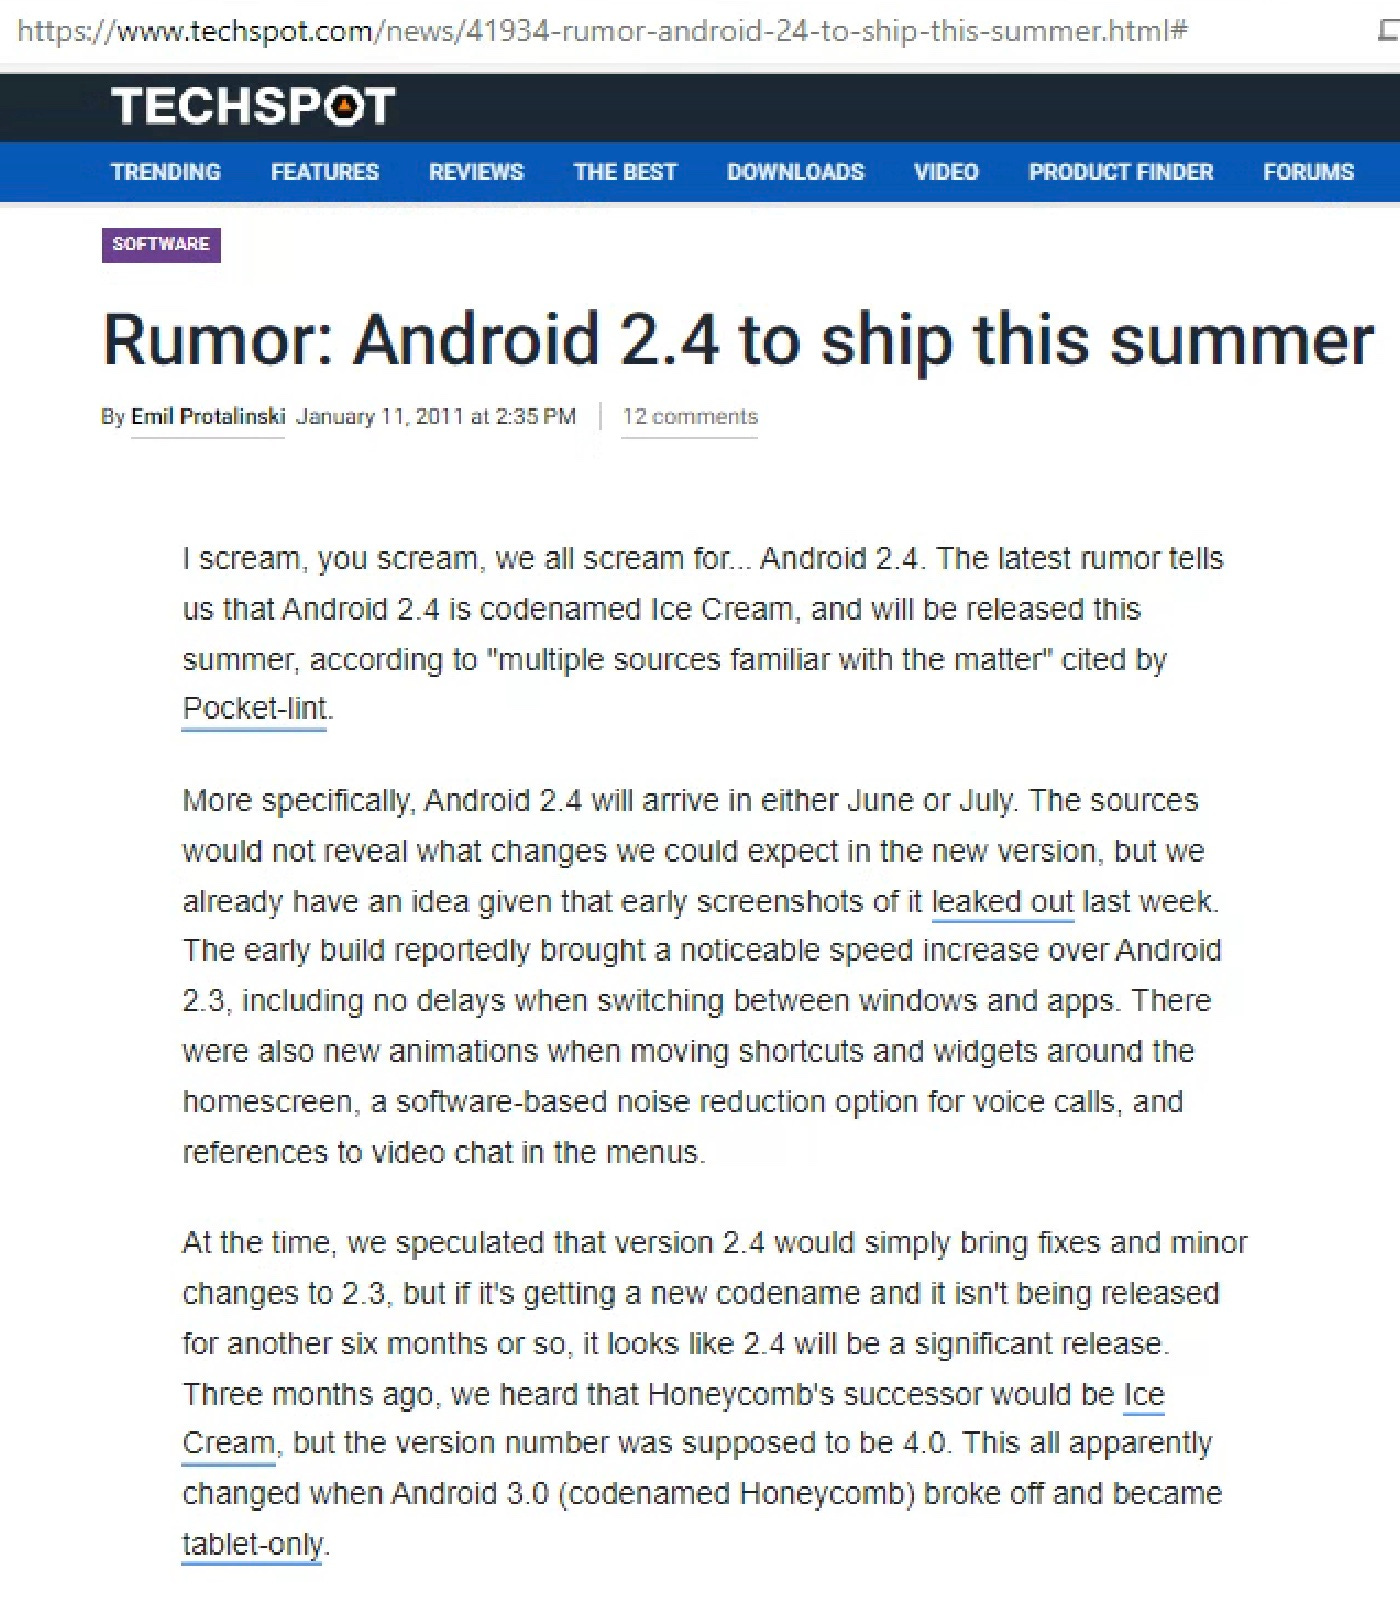 Rumor: Android 2.4 to ship this summer By Emil Protalinski January 11, 2011 at 2:35 PM 12 comments I scream, you scream, we all scream for... Android 2.4. The latest rumor tells us that Android 2.4 is codenamed Ice Cream, and will be released this summer, according to "multiple sources familiar with the matter" cited by Pocket-lint. More specifically, Android 2.4 will arrive in either June or July. The sources would not reveal what changes we could expect in the new version, but we already have an idea given that early screenshots of it leaked out last week. The early build reportedly brought a noticeable speed increase over Android 2.3, including no delays when switching between windows and apps. There were also new animations when moving shortcuts and widgets around the homescreen, a software-based noise reduction option for voice calls, and references to video chat in the menus. At the time, we speculated that version 2.4 would simply bring fixes and minor changes to 2.3, but if it's getting a new codename and it isn't being released for another six months or so, it looks like 2.4 will be a significant release. Three months ago, we heard that Honeycomb's successor would be Ice Cream, but the version number was supposed to be 4.0. This all apparently changed when Android 3.0 (codenamed Honecomb) broke off and became tablet-only.